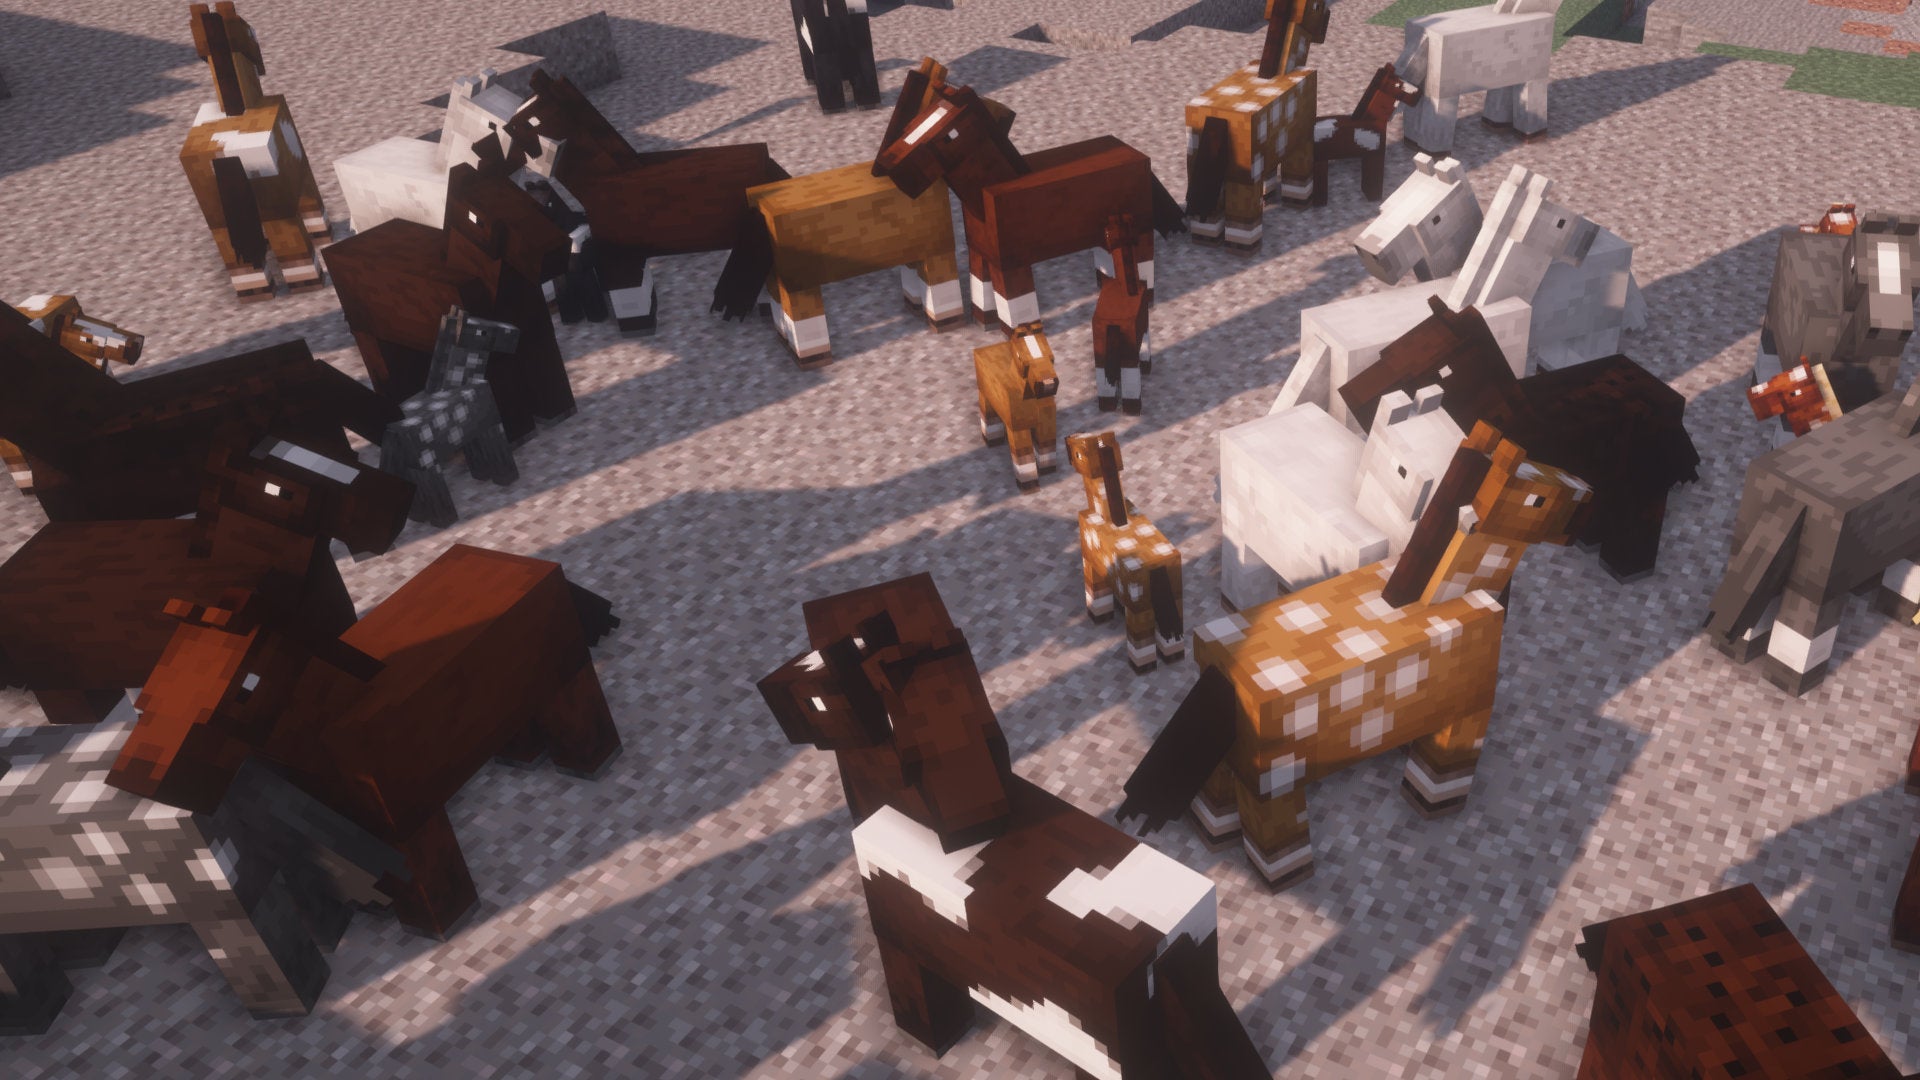 A Minecraft screenshot of many horses of different colours and markings in close proximity on a bed of gravel.